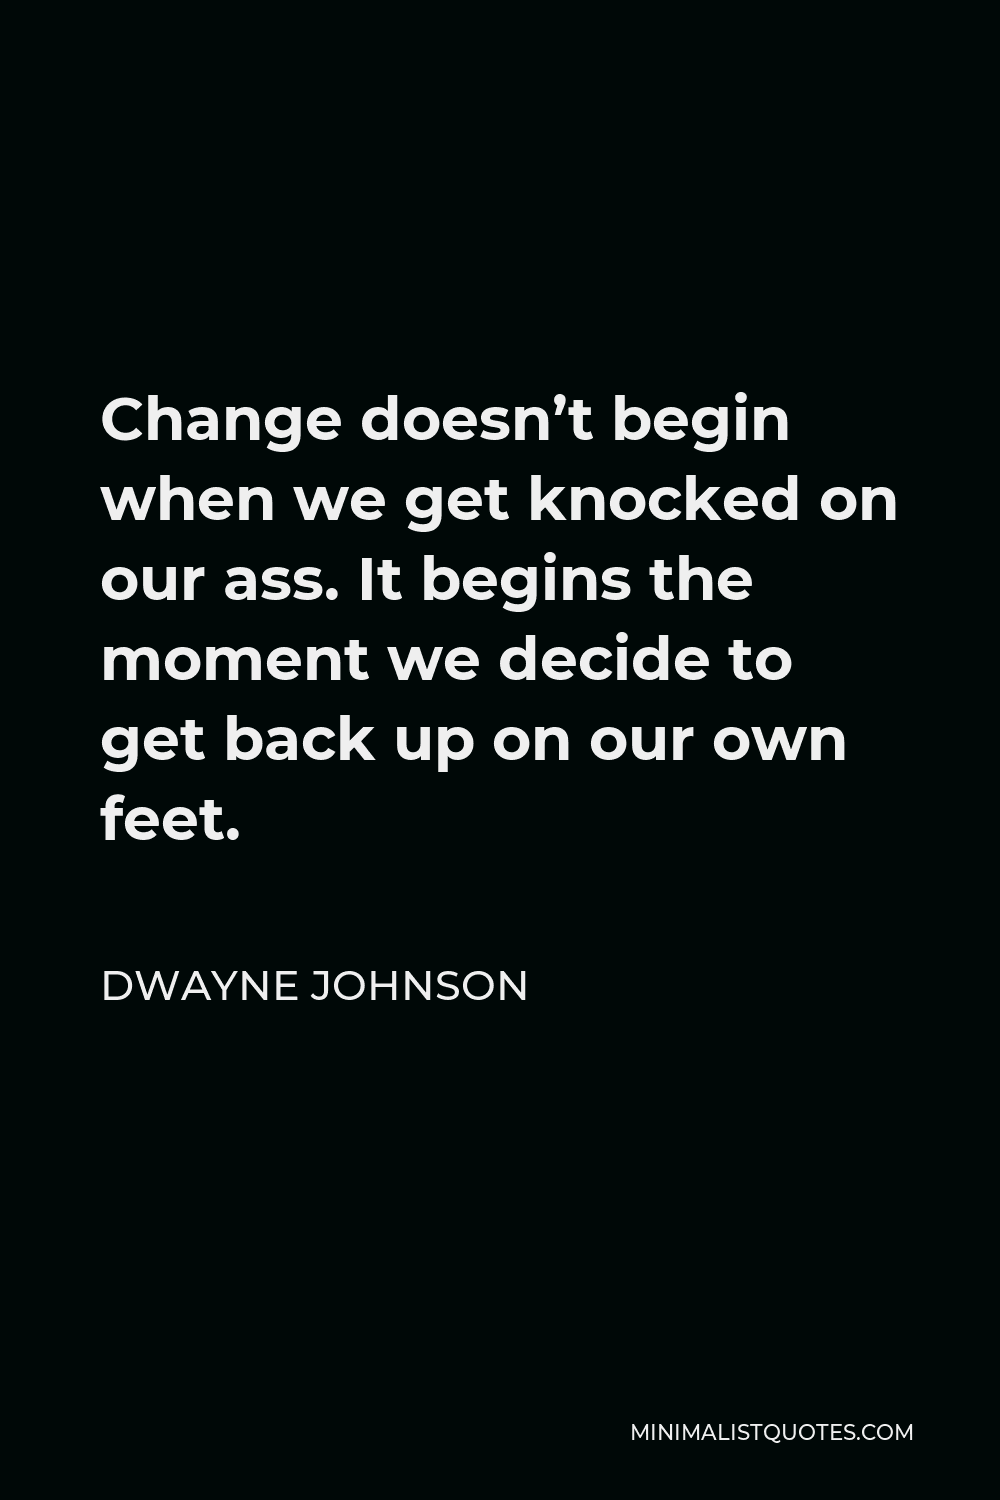 Dwayne Johnson Quote - Change doesn’t begin when we get knocked on our ass. It begins the moment we decide to get back up on our own feet.